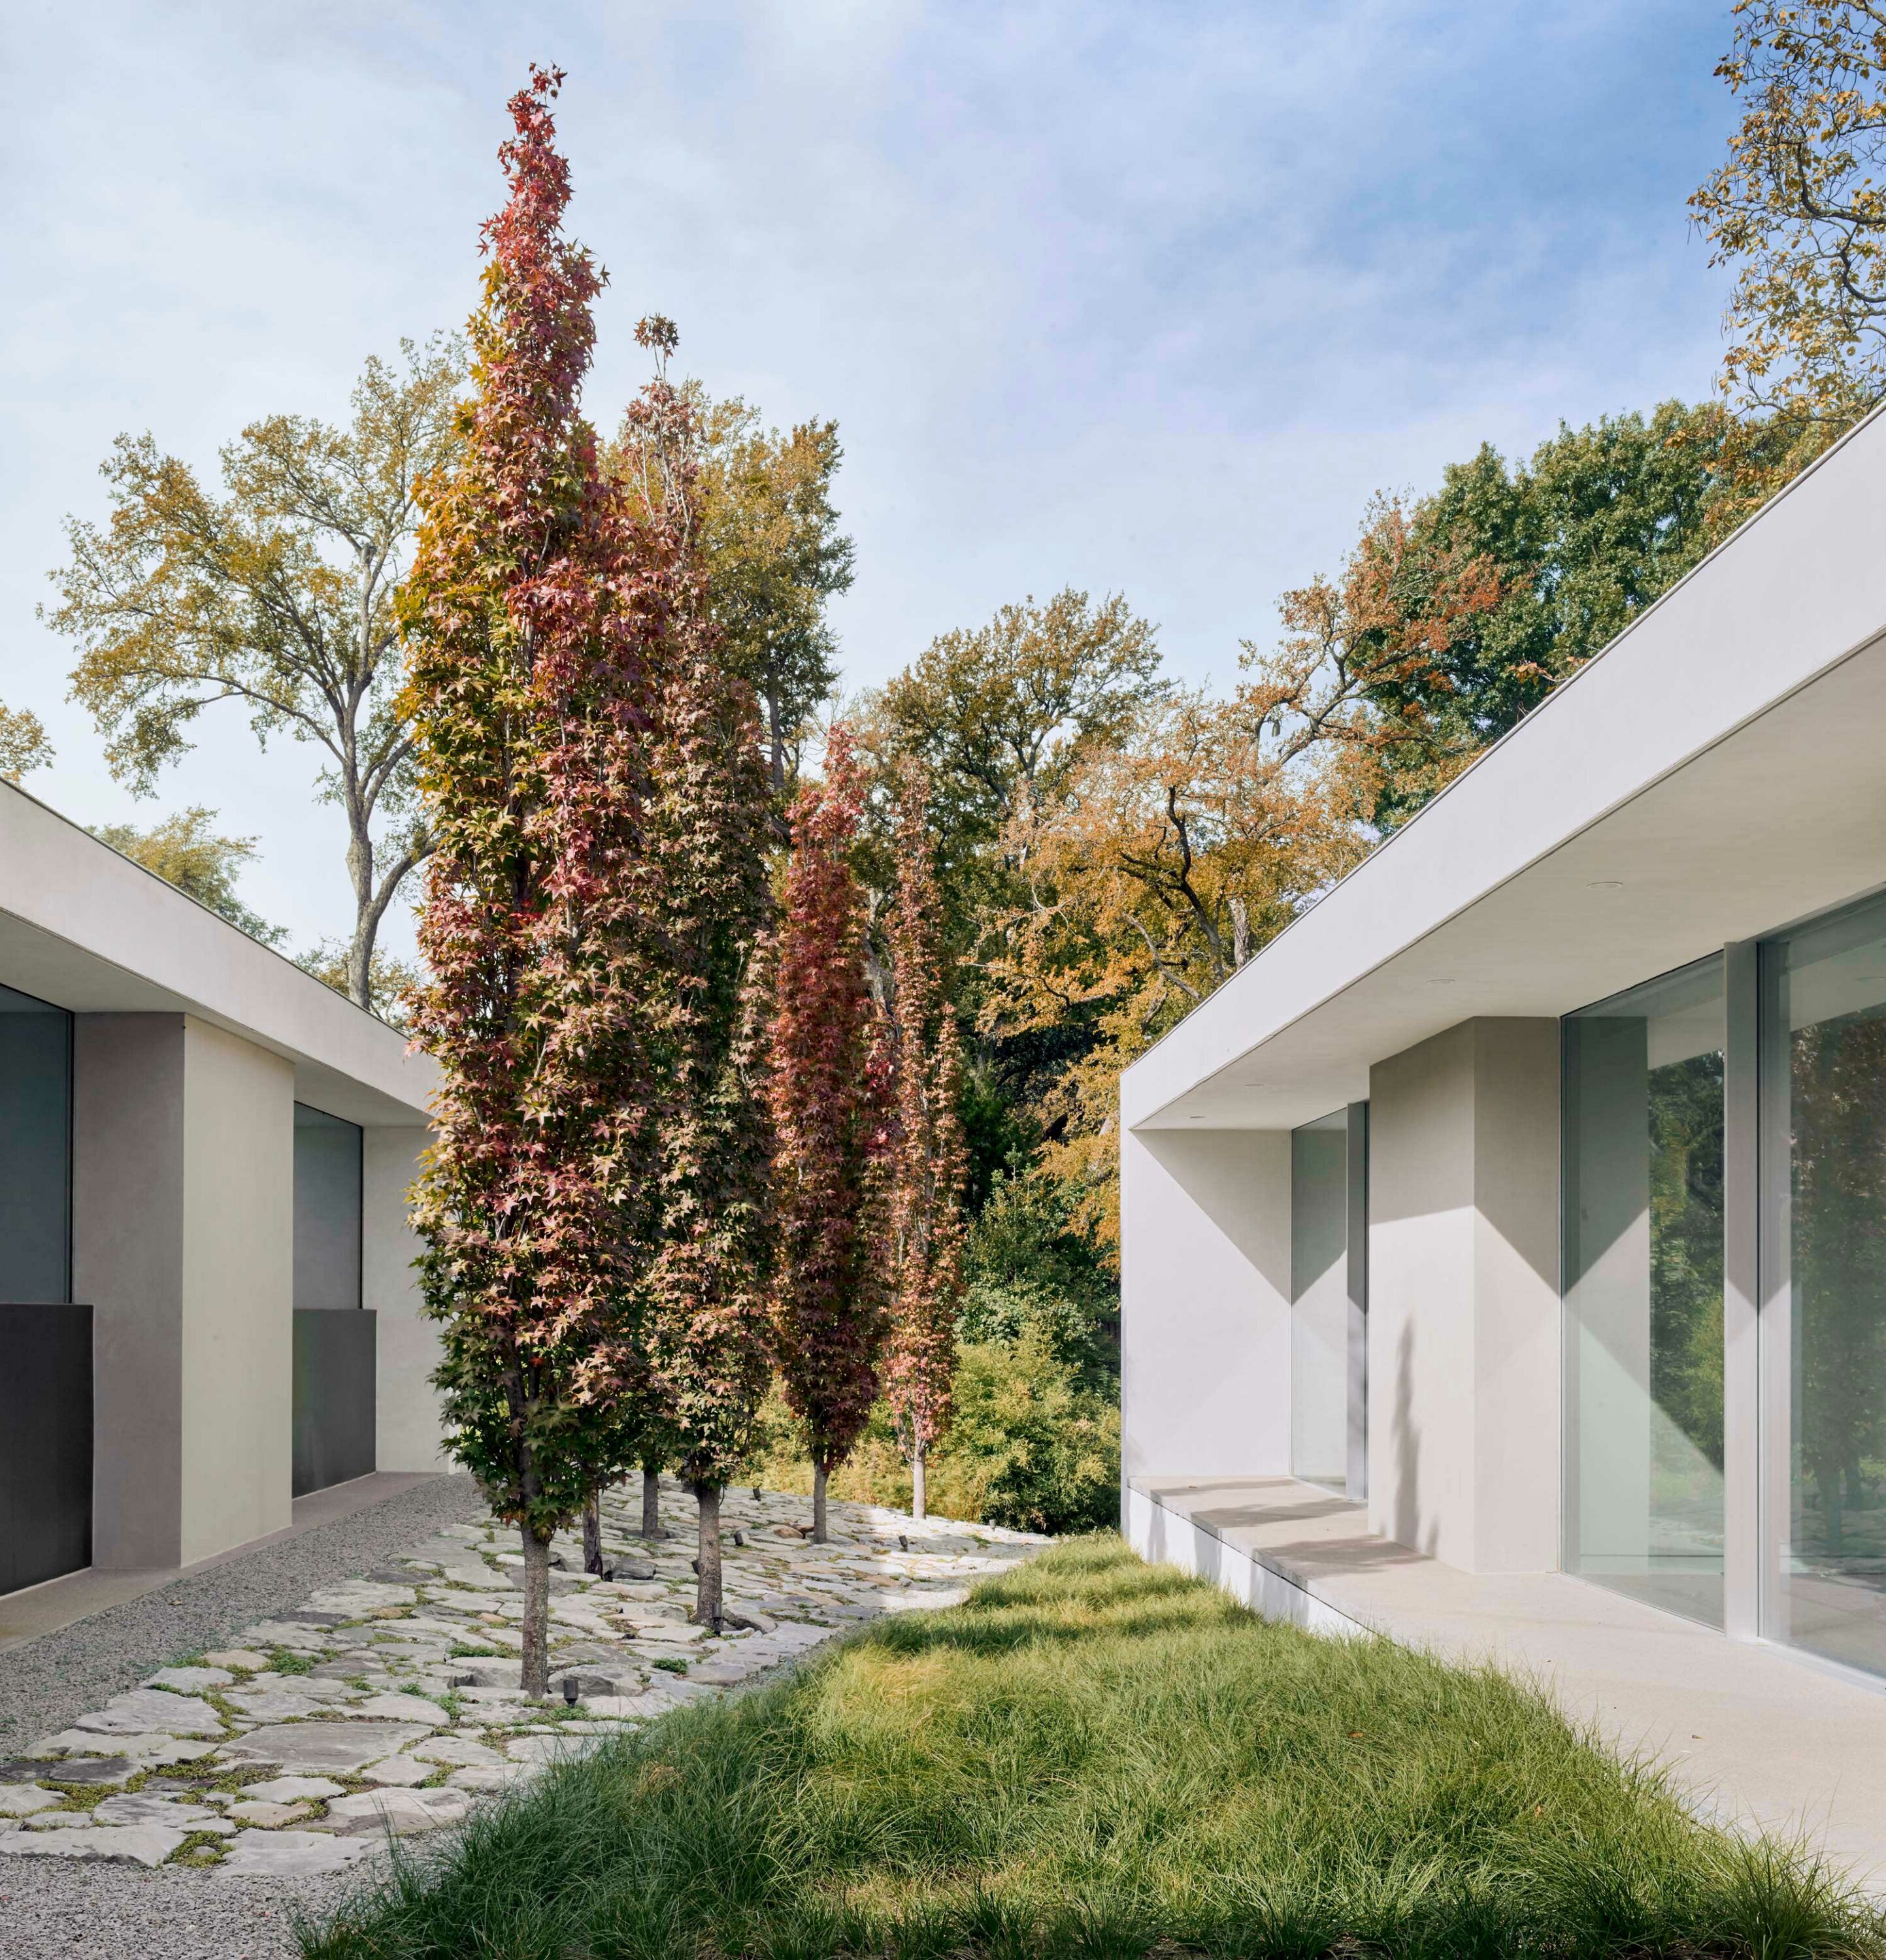 Exterior photo of the Preston Hollow Residence by Specht Novak Architects. Shot by Manolo Langis, featuring a tree garden that separates two opposite wings of the home.